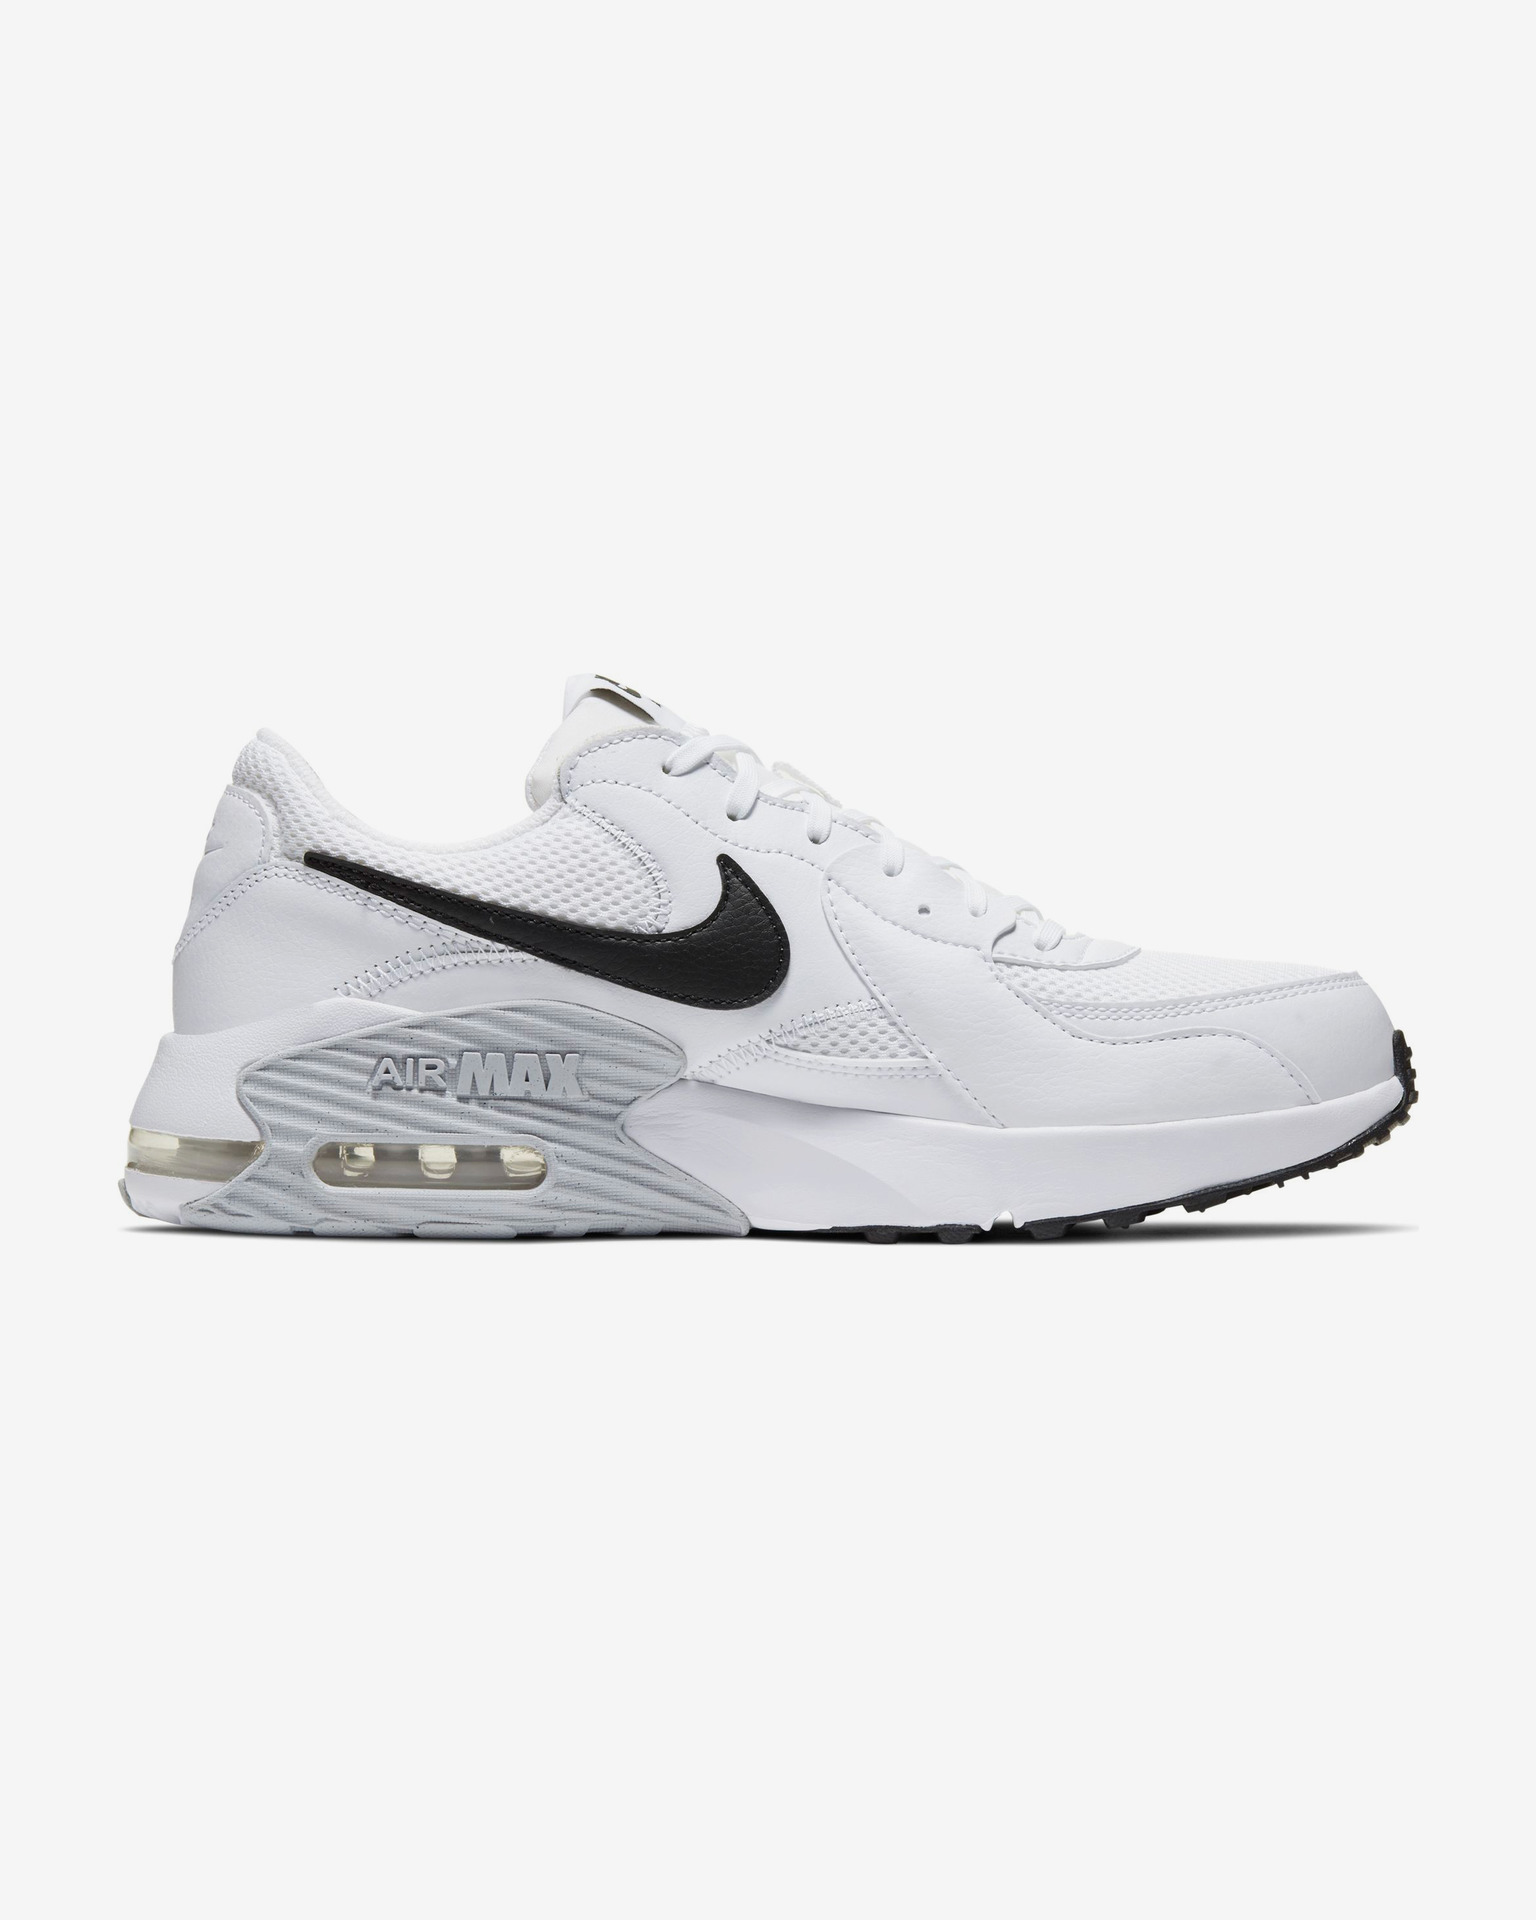 Nike | Air Max Excee Ladies Trainers | Runners | SportsDirect.com